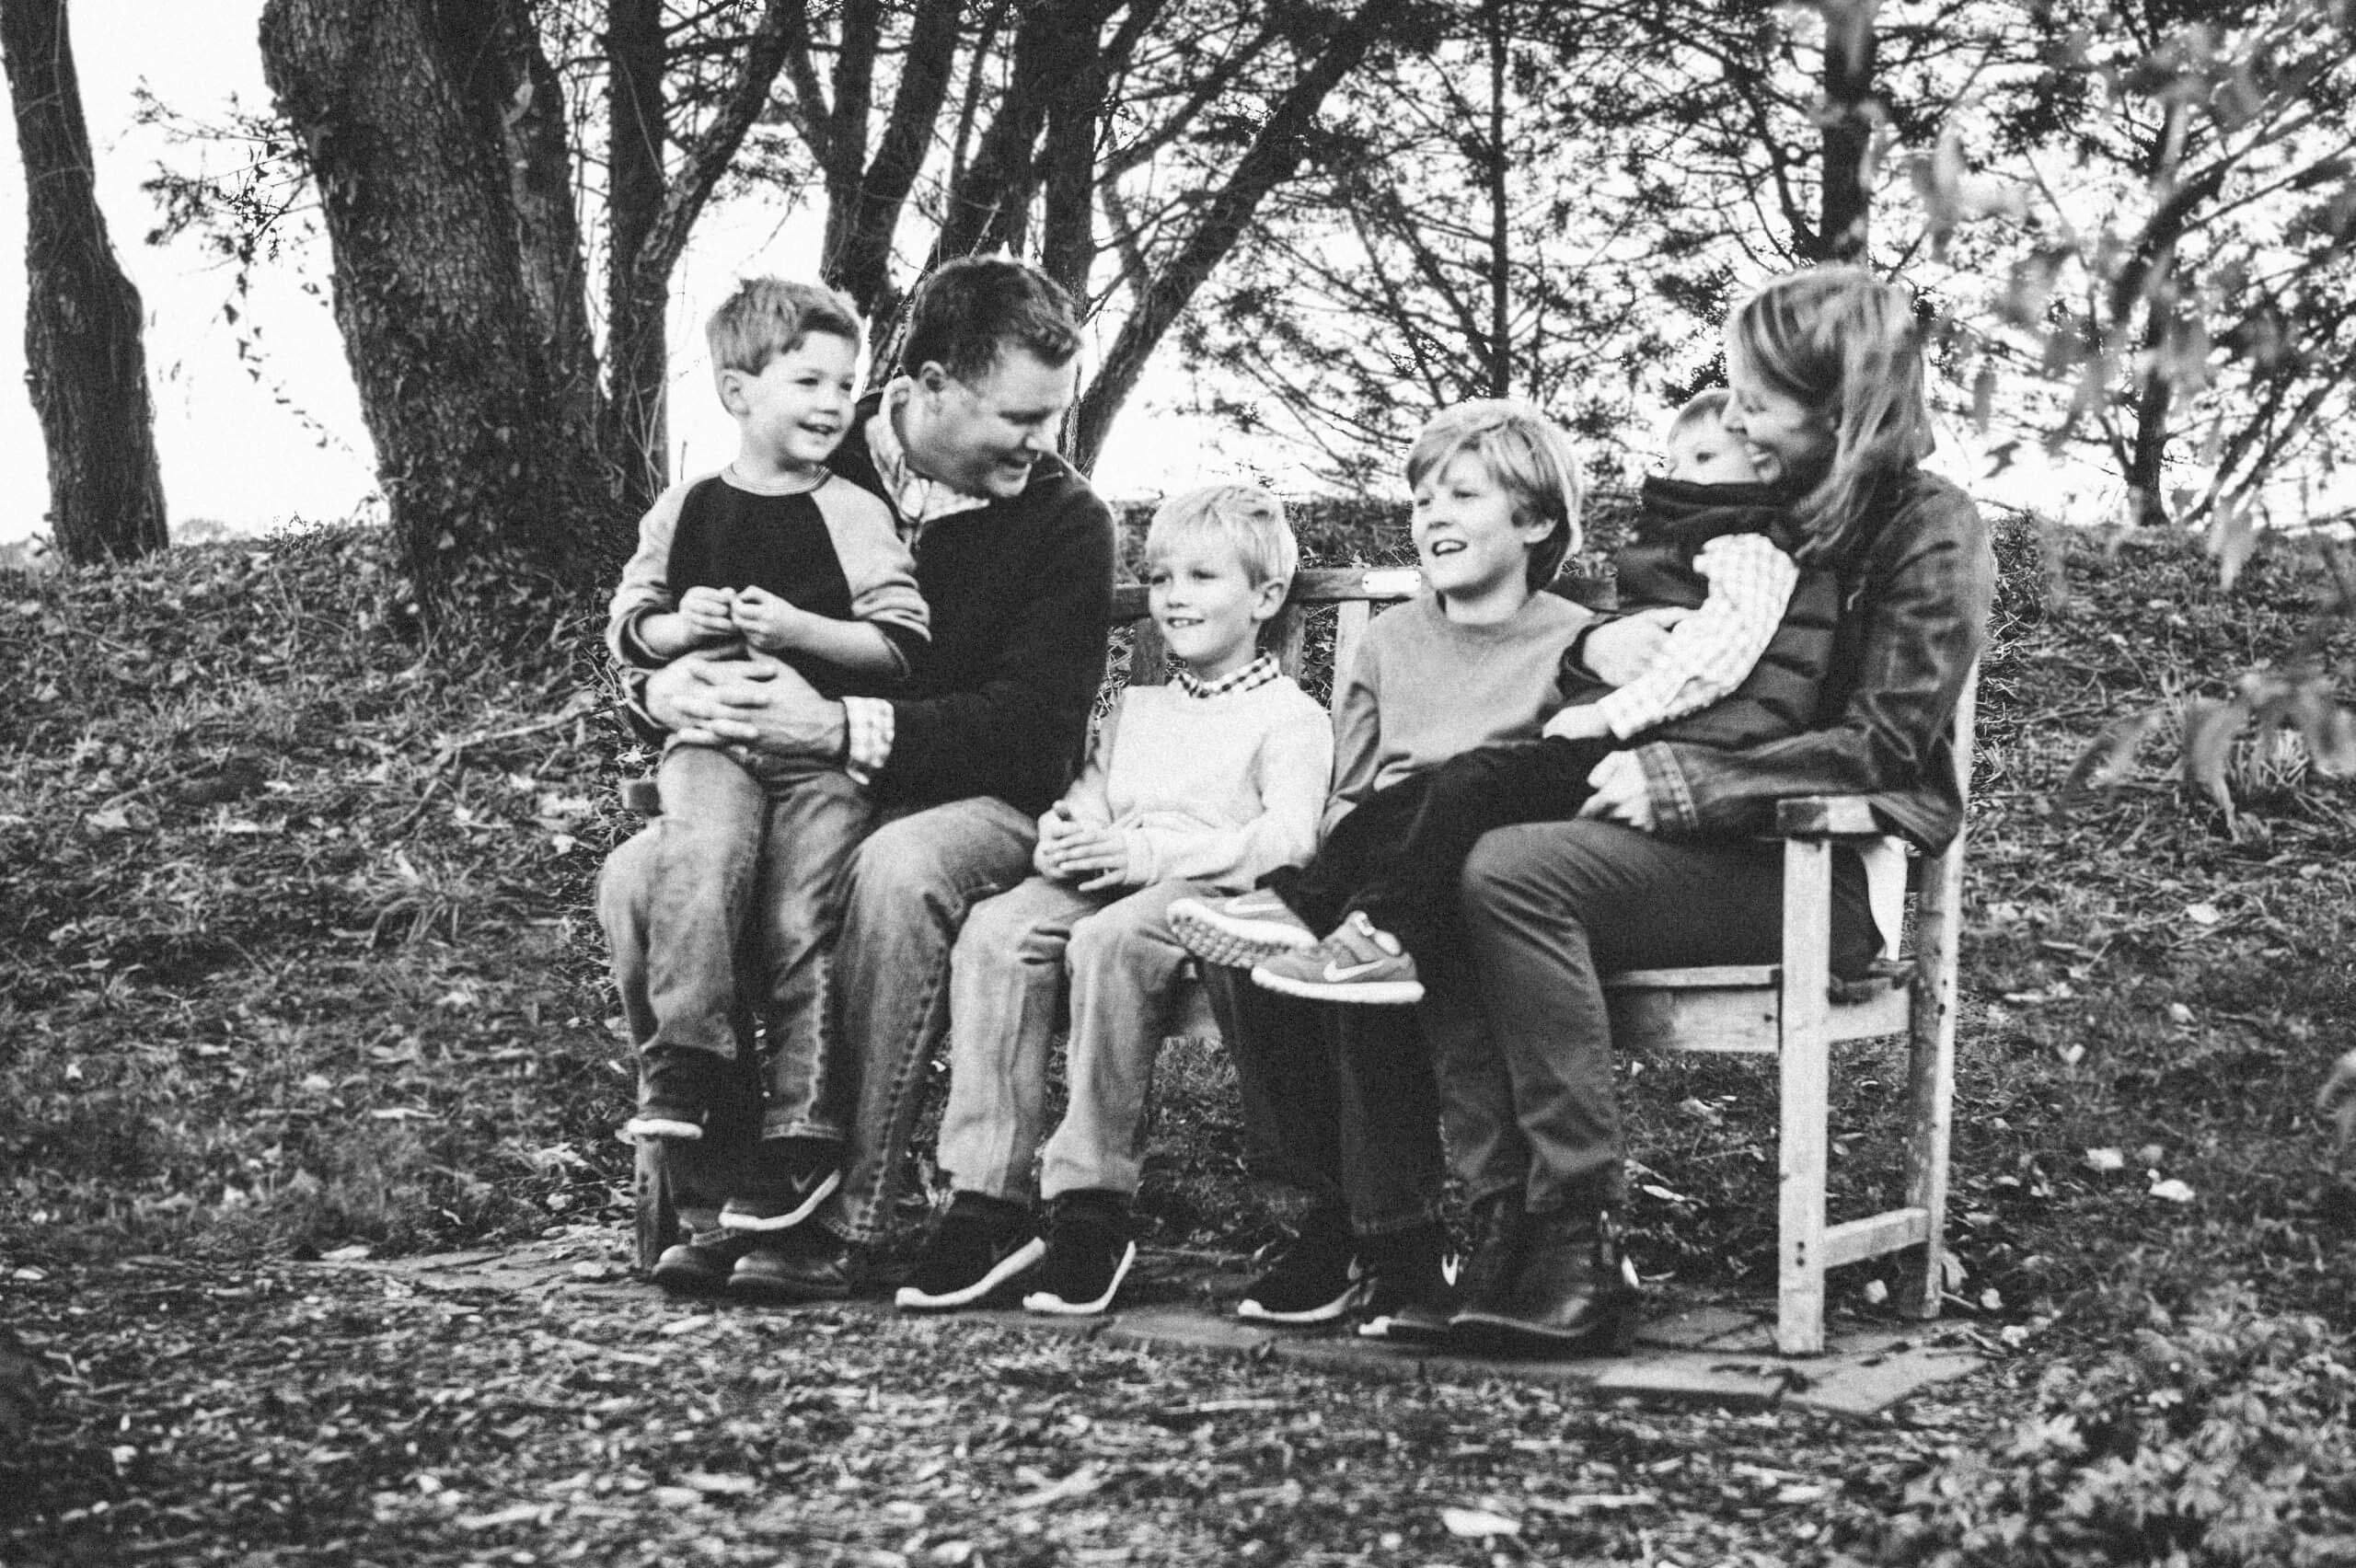 A portrait of a family sitting on a wooden bench outside. A man and woman sit on either side of the bench and smile down at the four children sitting between them.